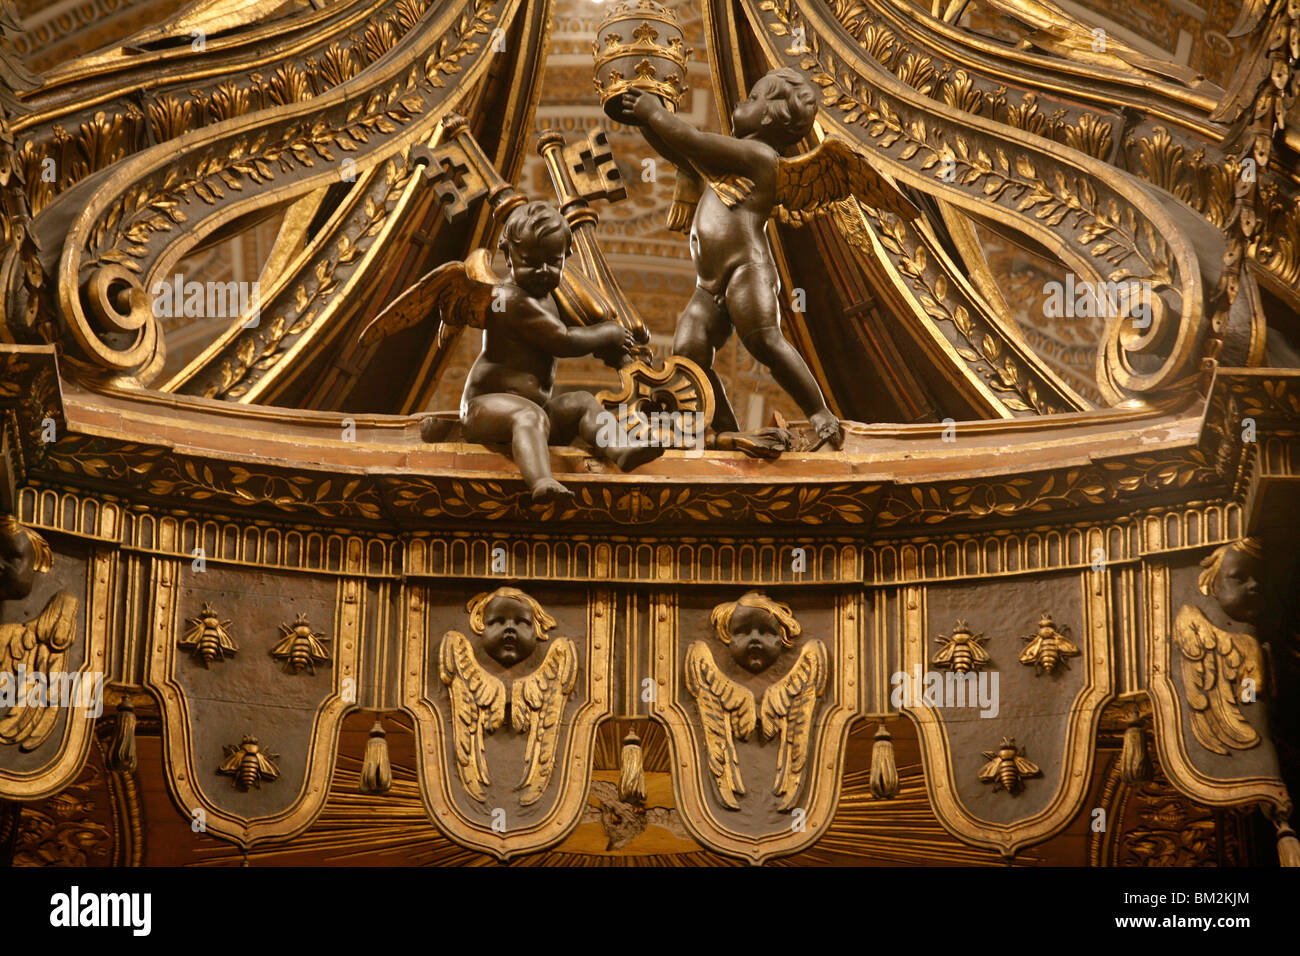 Detail of angels holding St. Peter's keys on the main altar, St. Peter's Basilica, Vatican, Rome, Lazio, Italy Stock Photo